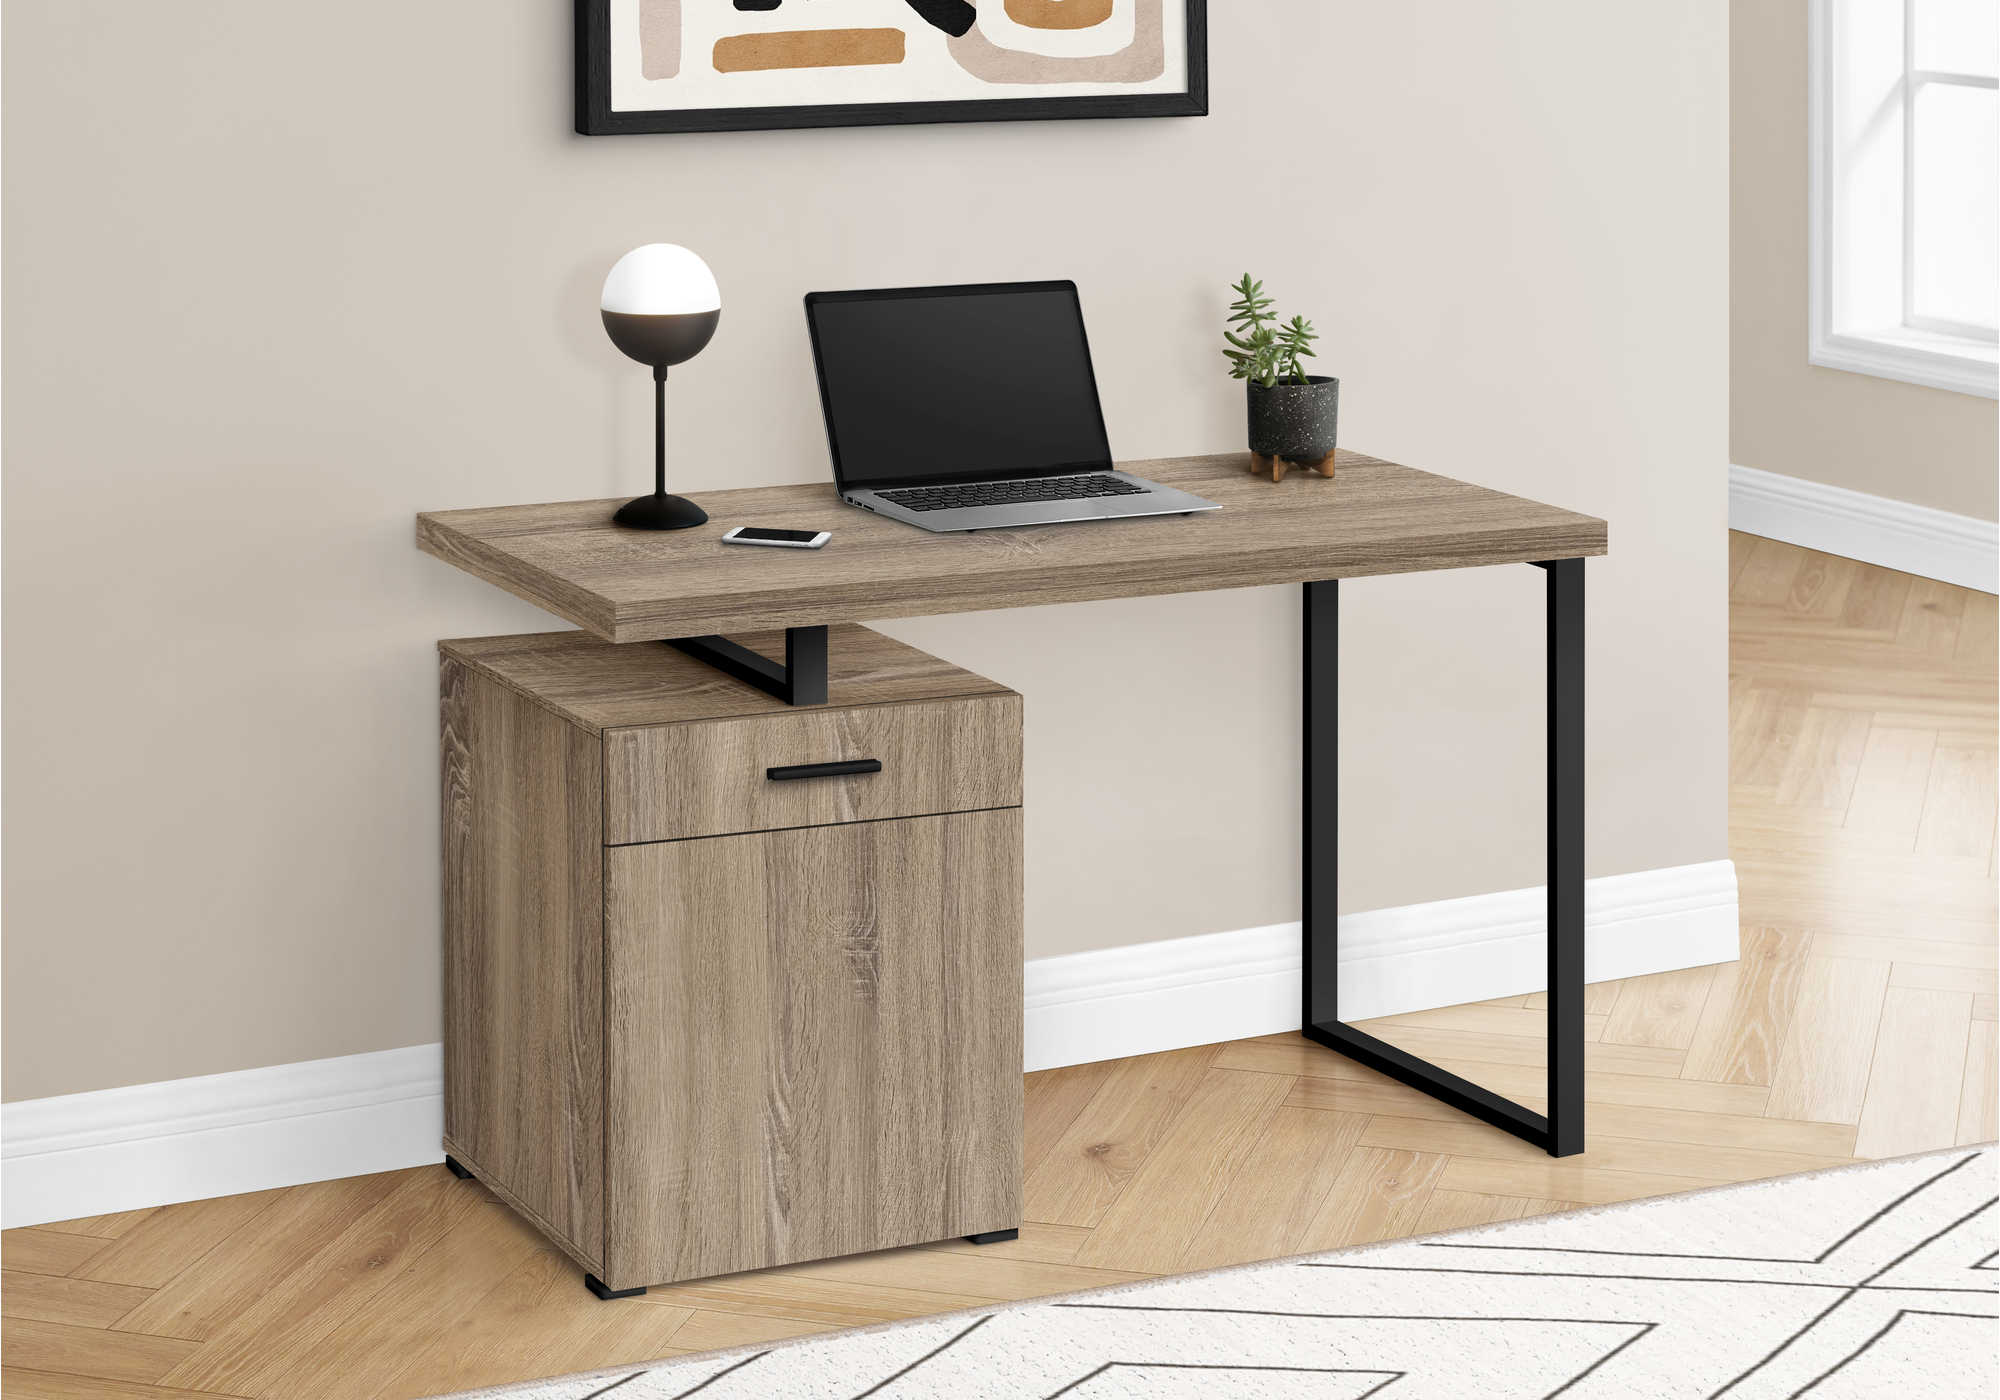 COMPUTER DESK - 48"L / DARK TAUPE LEFT OR RIGHT FACING